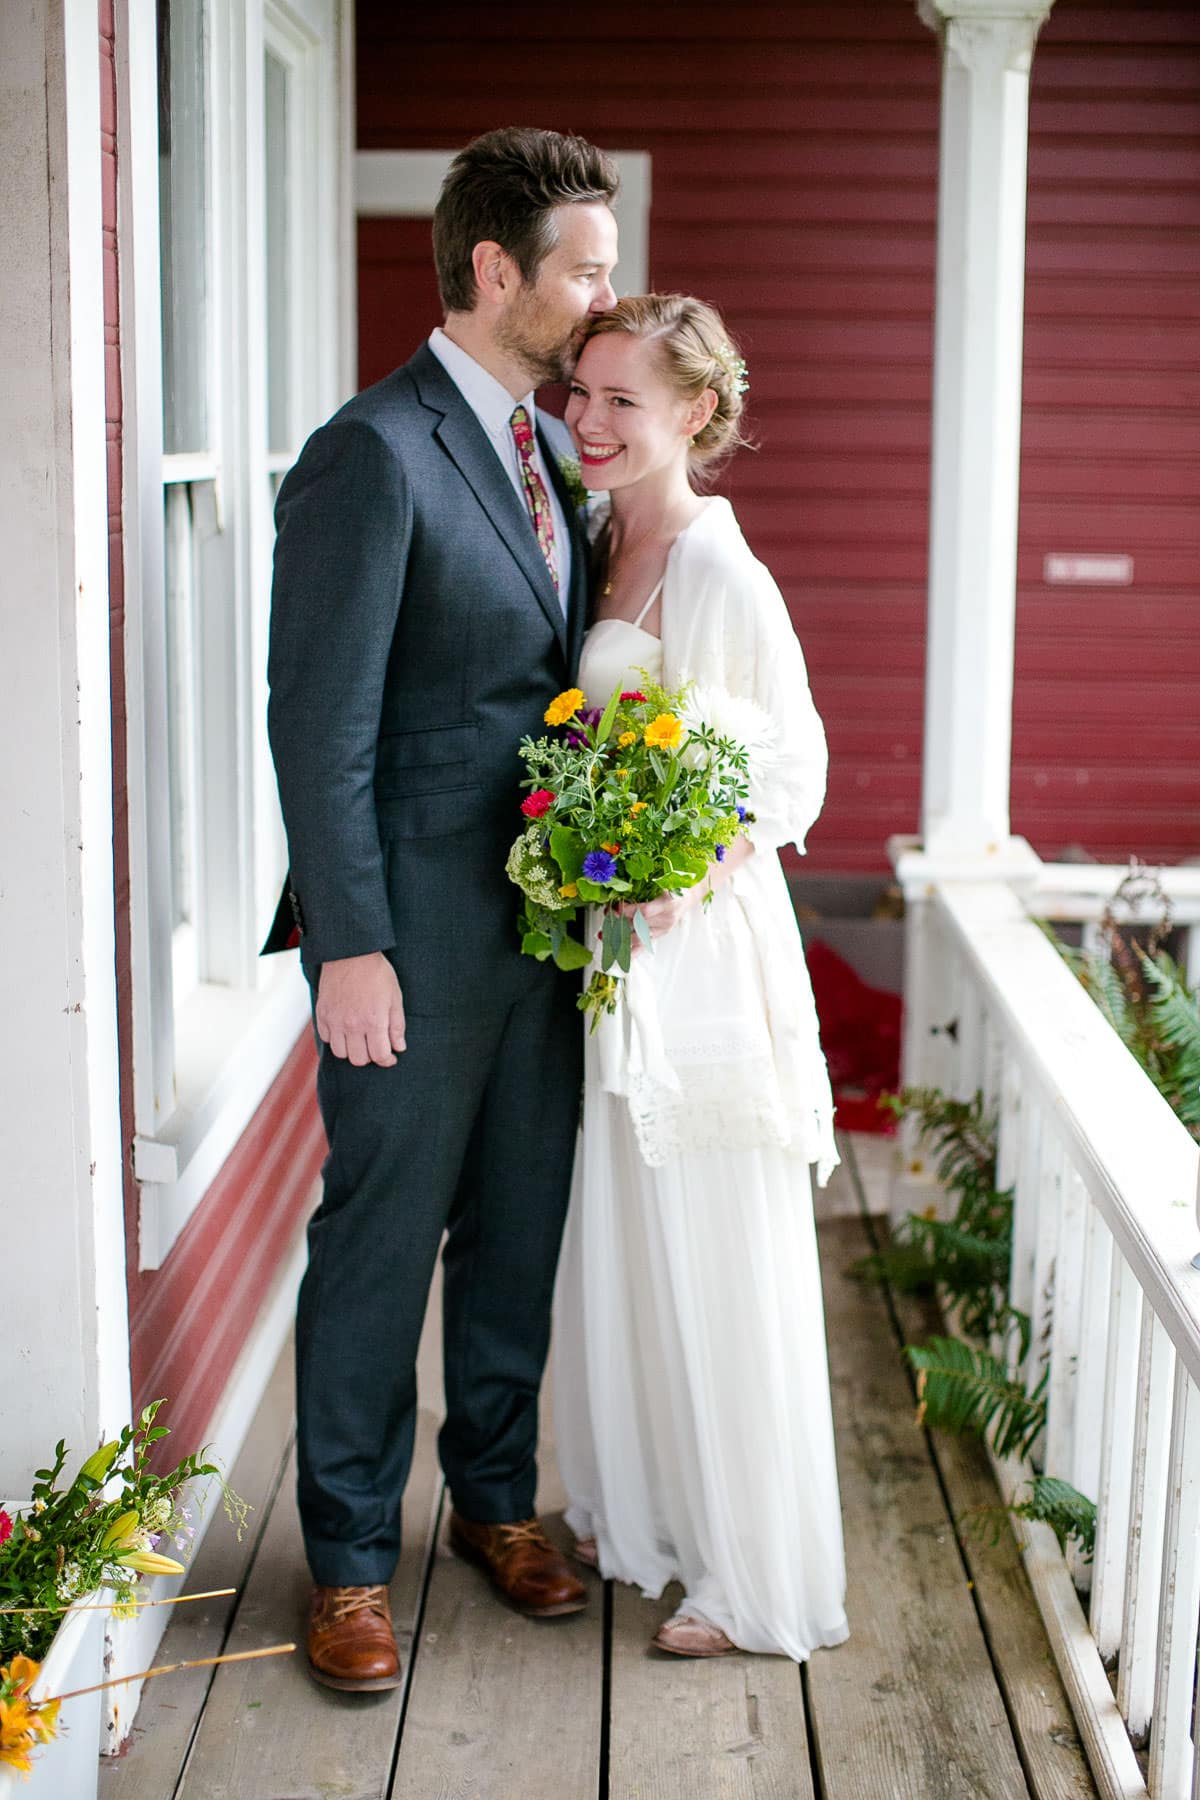 Groom and bride on porch of red house in wedding clothes